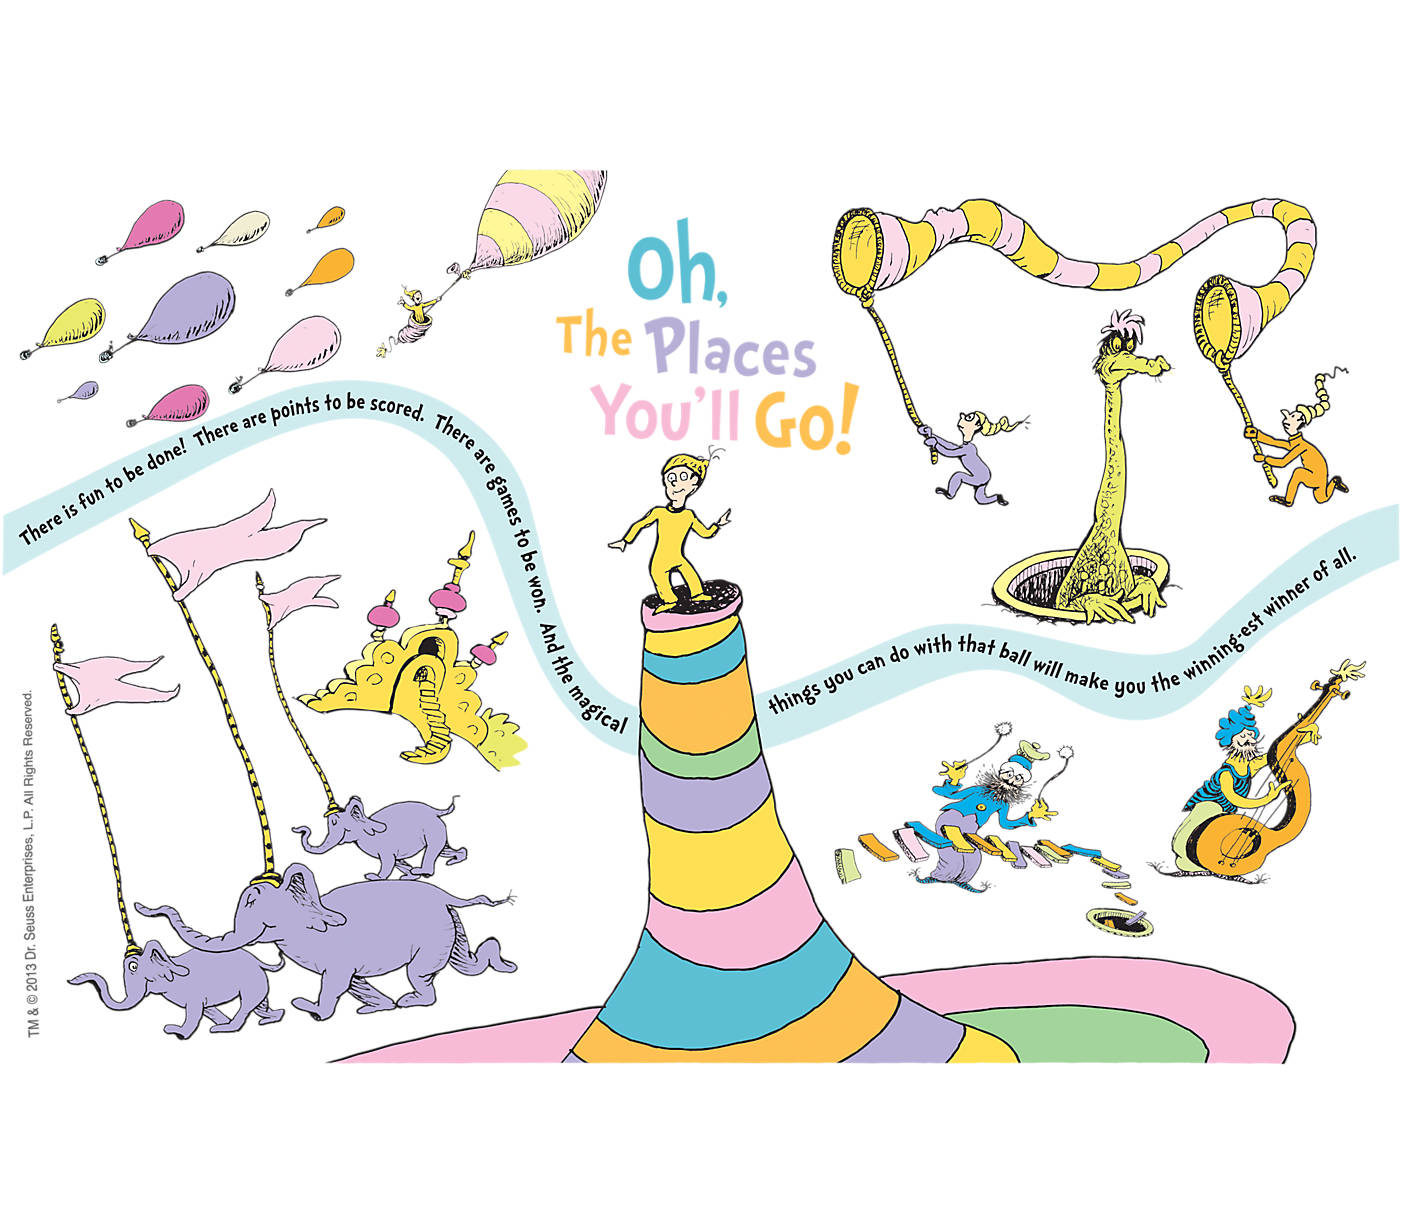 dr-seuss-clip-art-oh-the-places-you-ll-go-20-free-cliparts-download